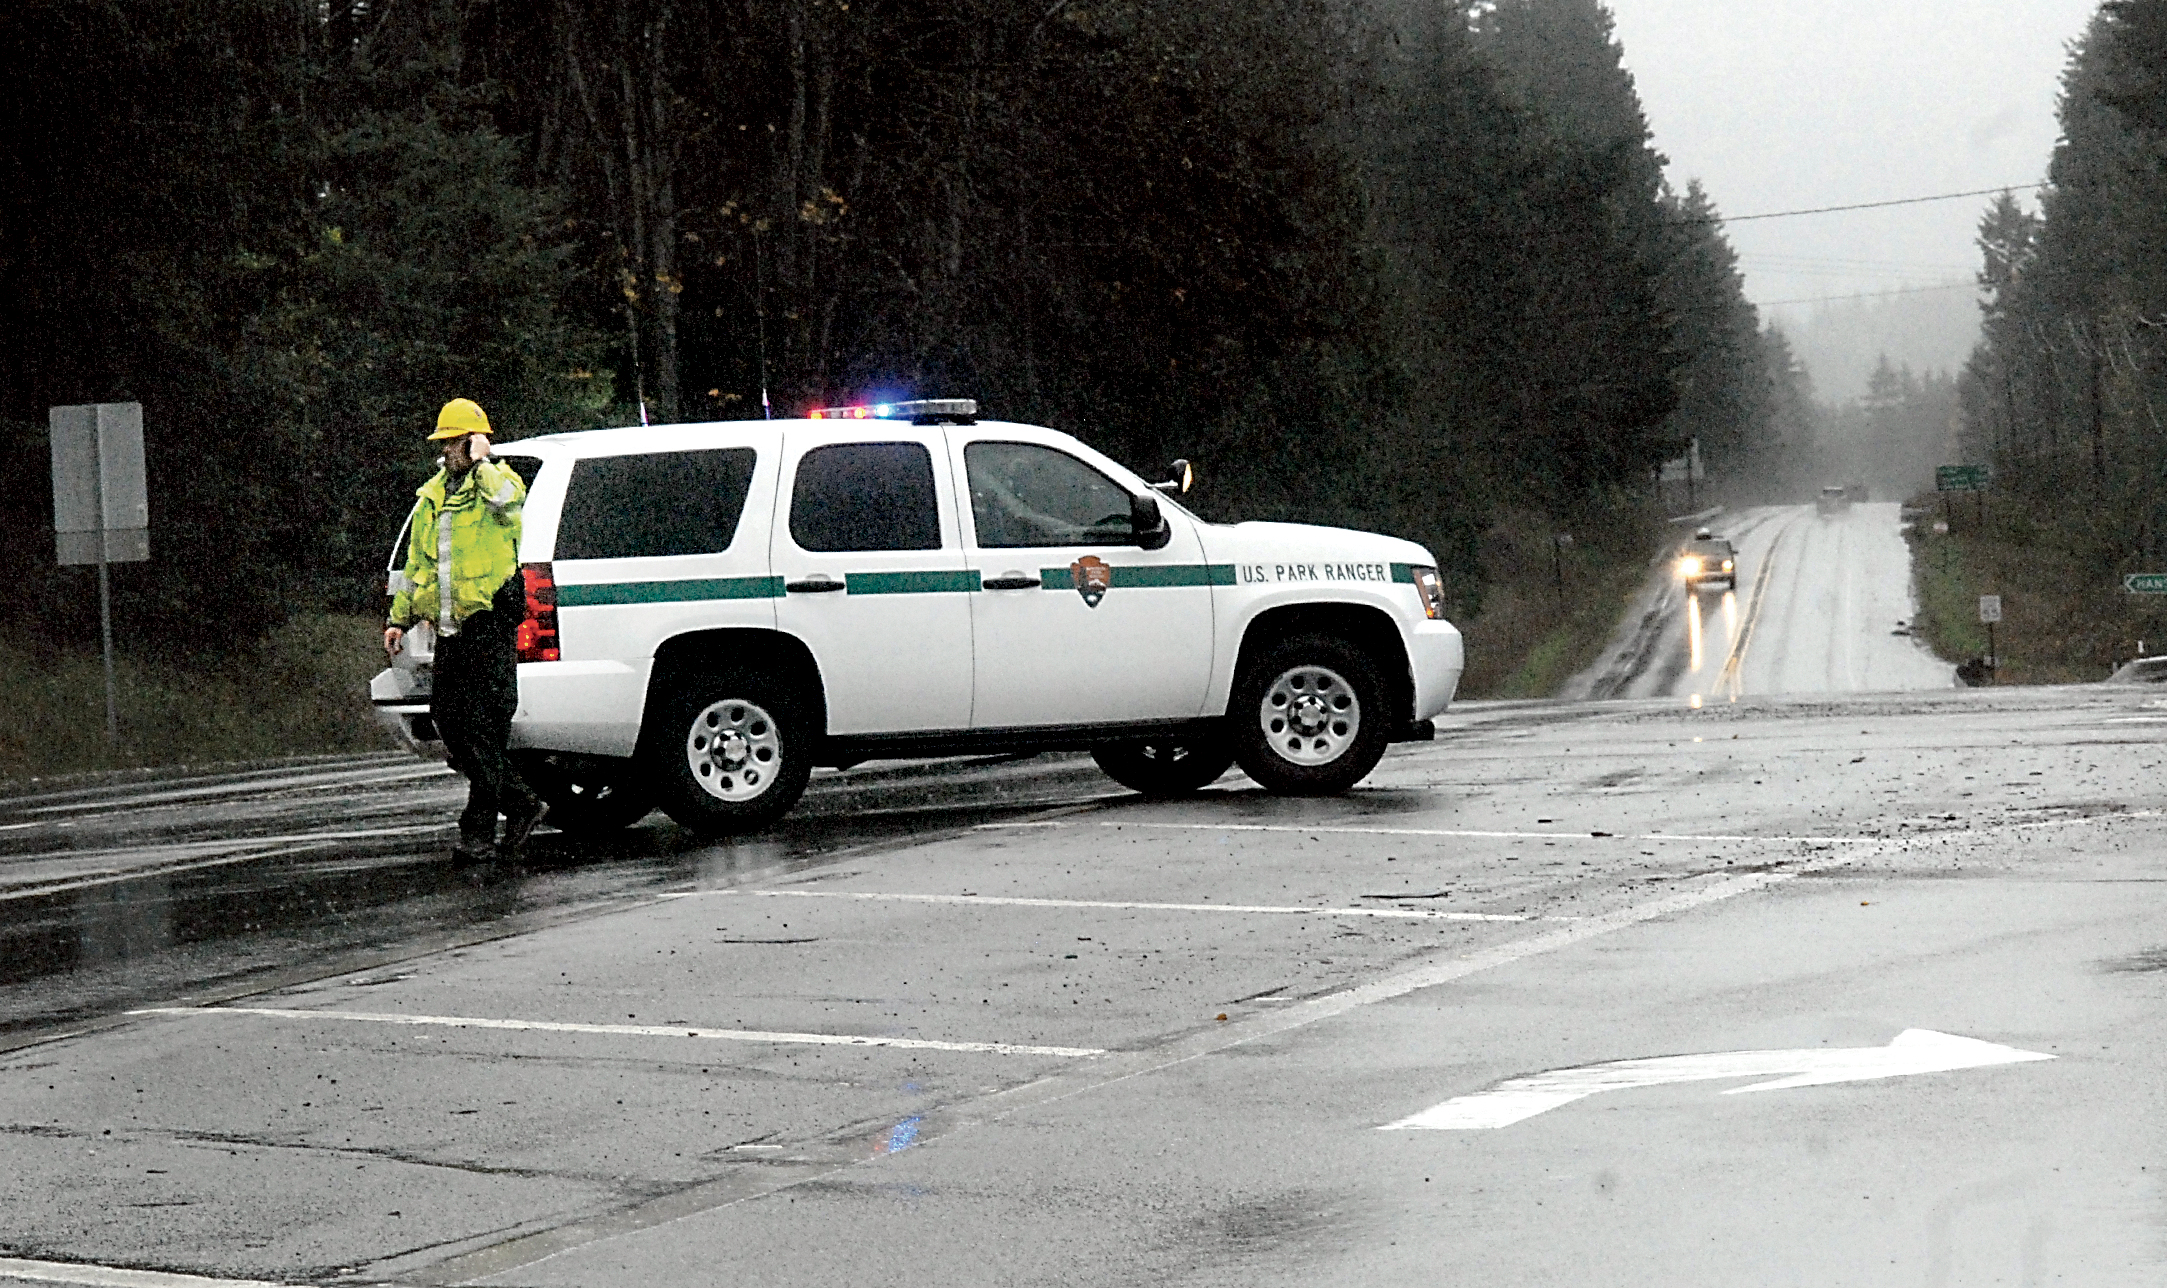 Olympic National Park East District Ranger Mark O'Neill keeps watch to direct traffic at the intersection of U.S. Highway 101 and state Highway 112 west of Port Angeles after park officials closed U.S. 101 around Lake Crescent because of an overflowing culvert after high winds and heavy rains overtook the area Tuesday. Keith Thorpe/Peninsula Daily News